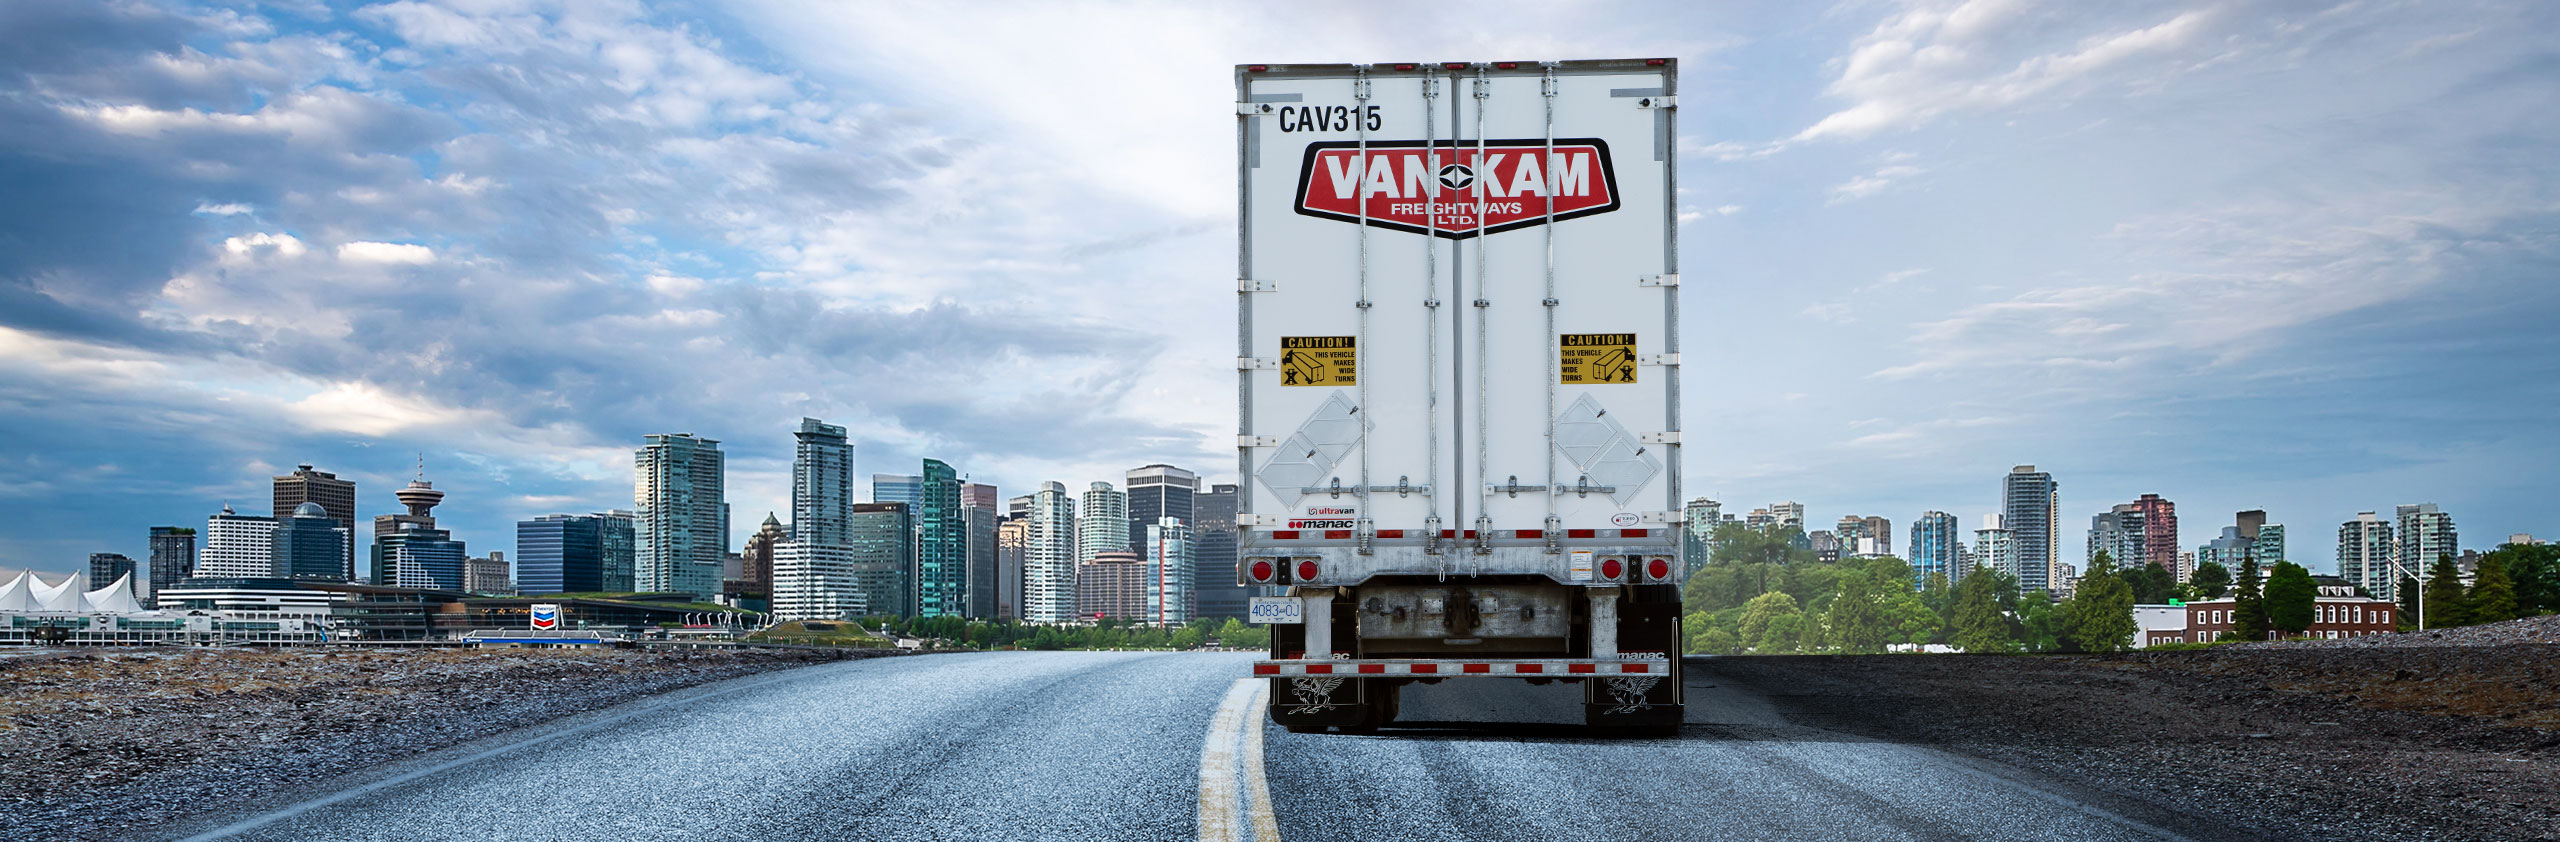 Back view of Van Kam trailer driving into Vancouver